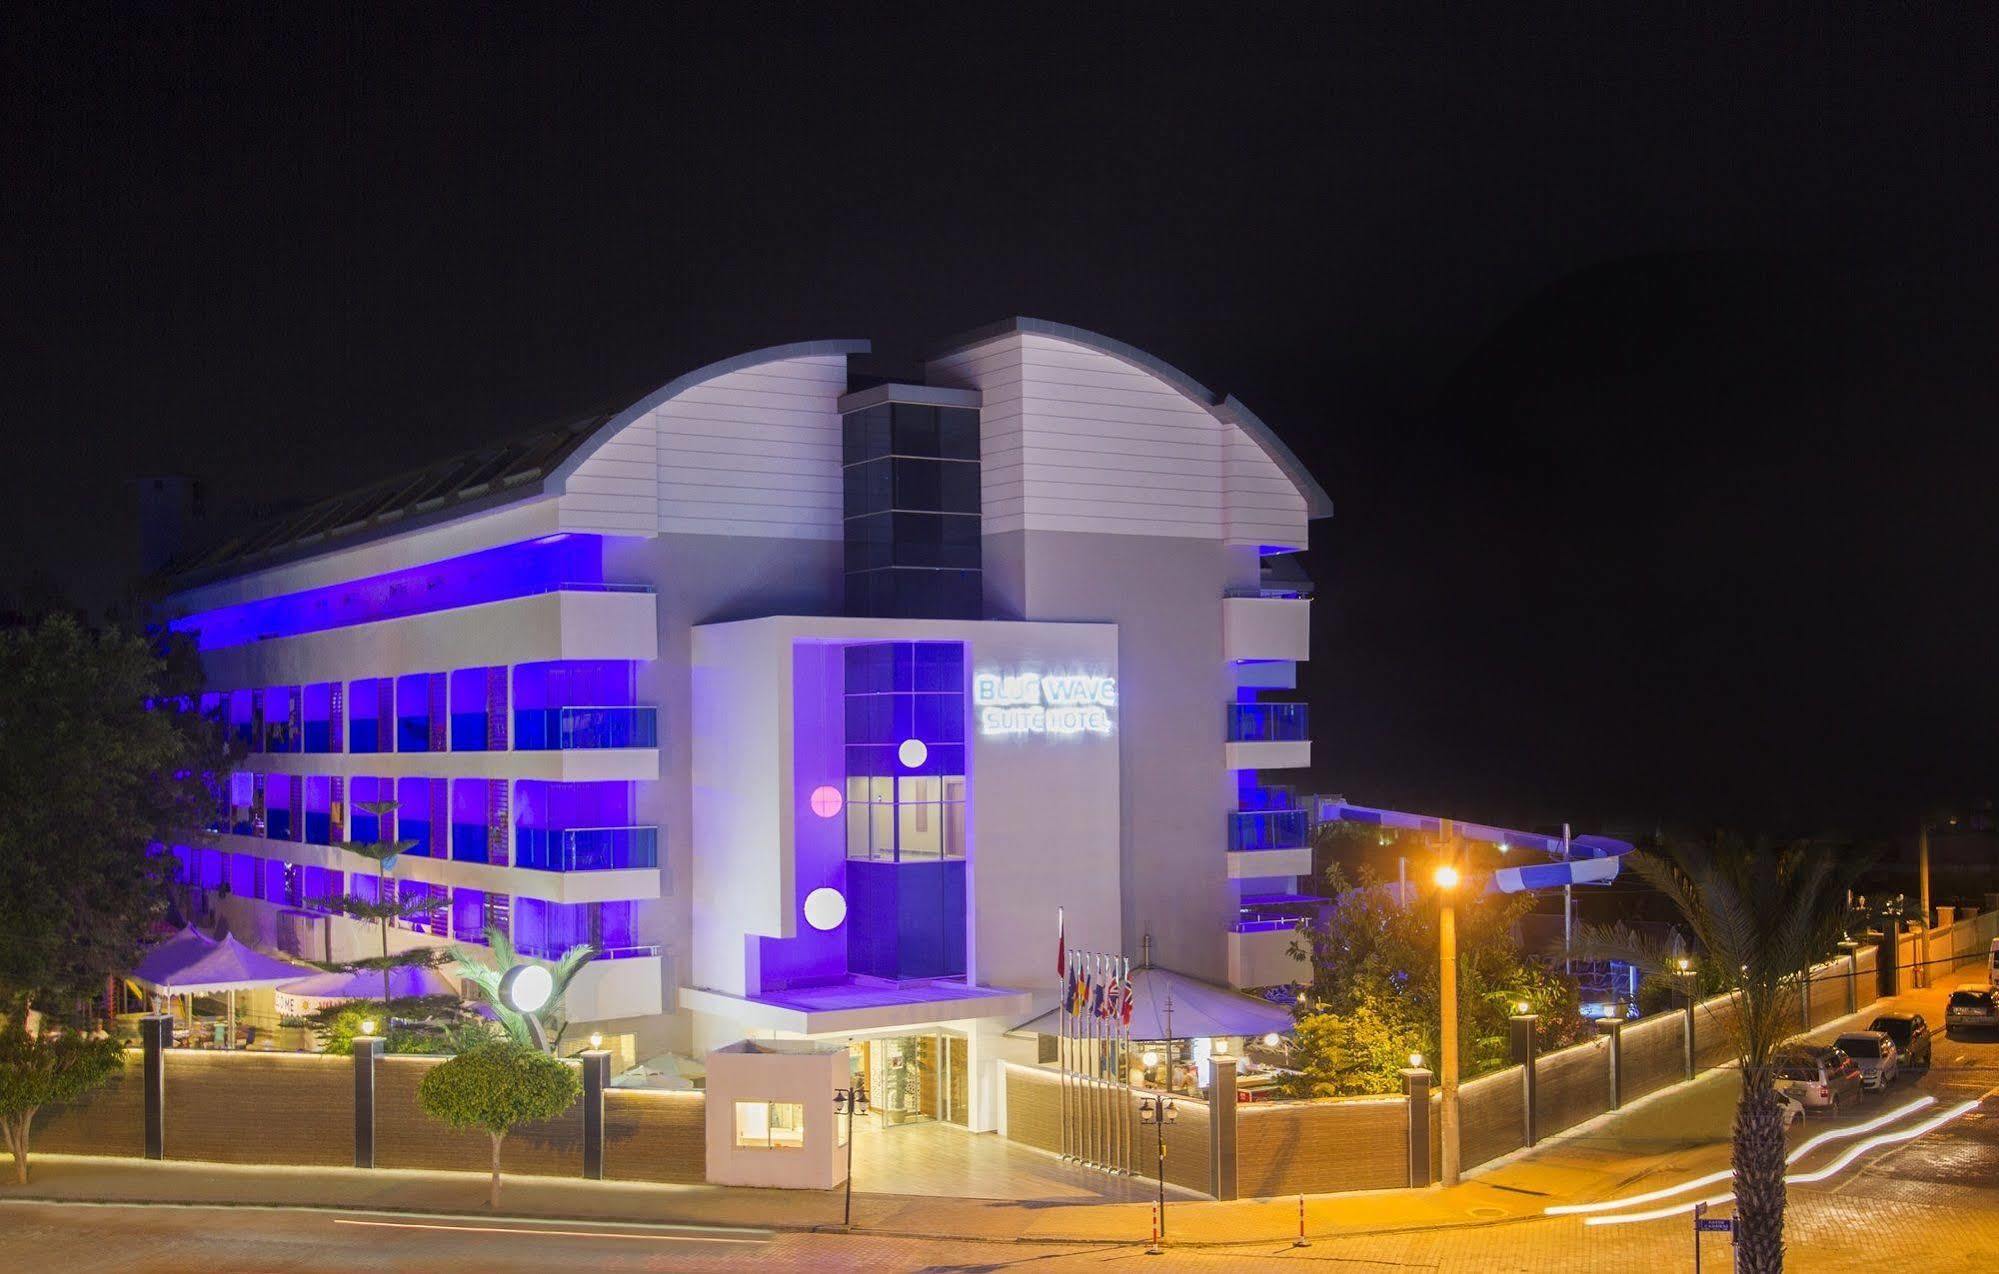 Blue Wave Suite Hotel Alanya Exterior photo